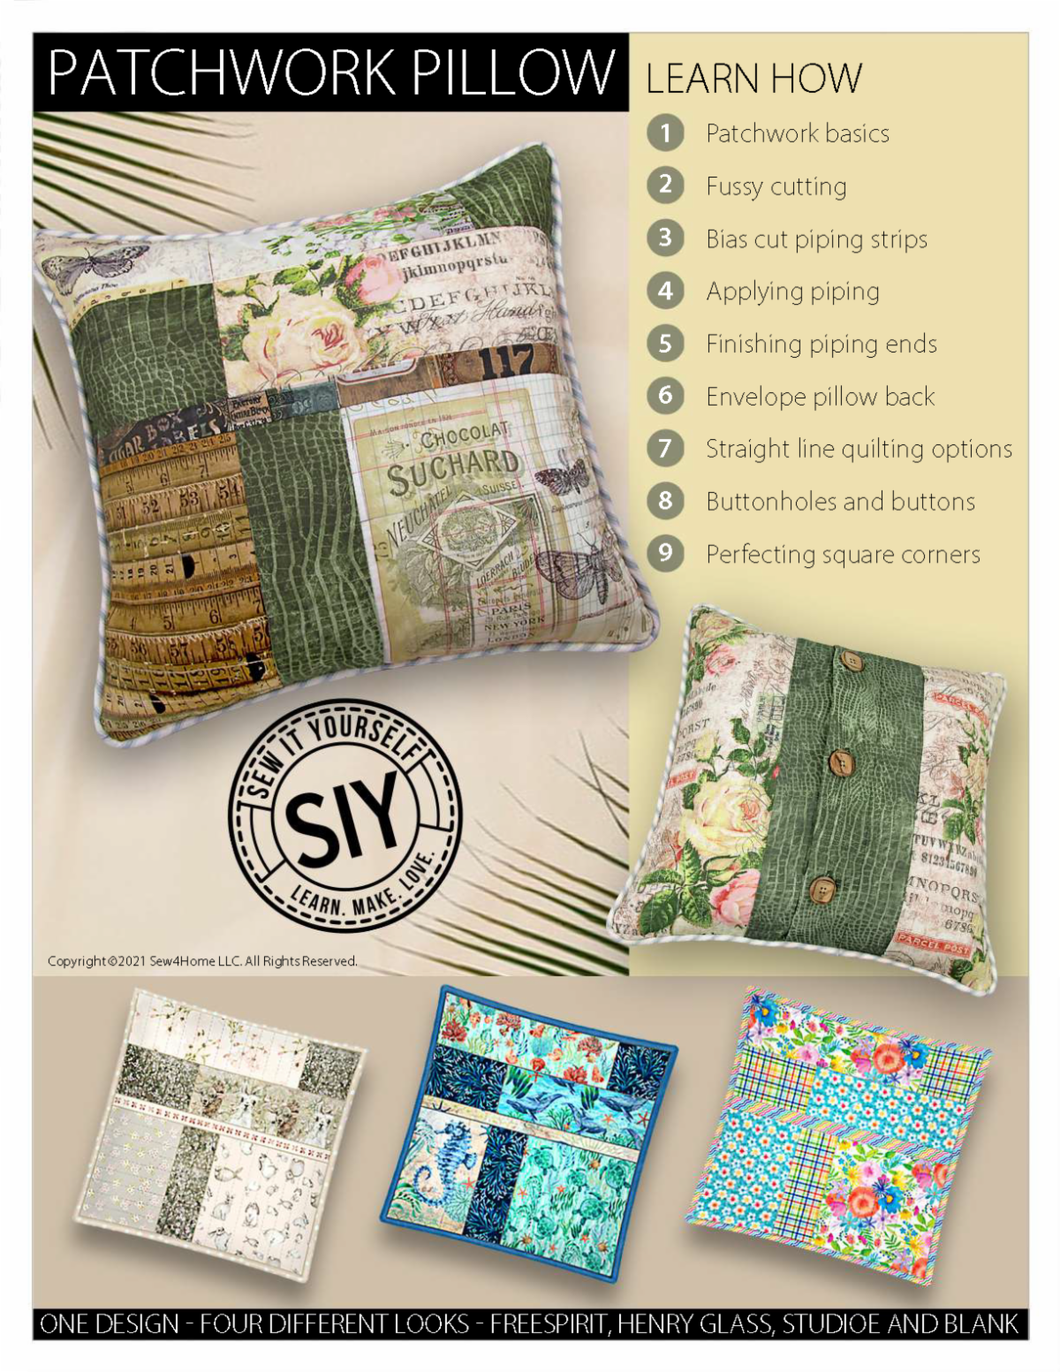 Patchwork Pillow SIY - Sew It Yourself™ Free Project